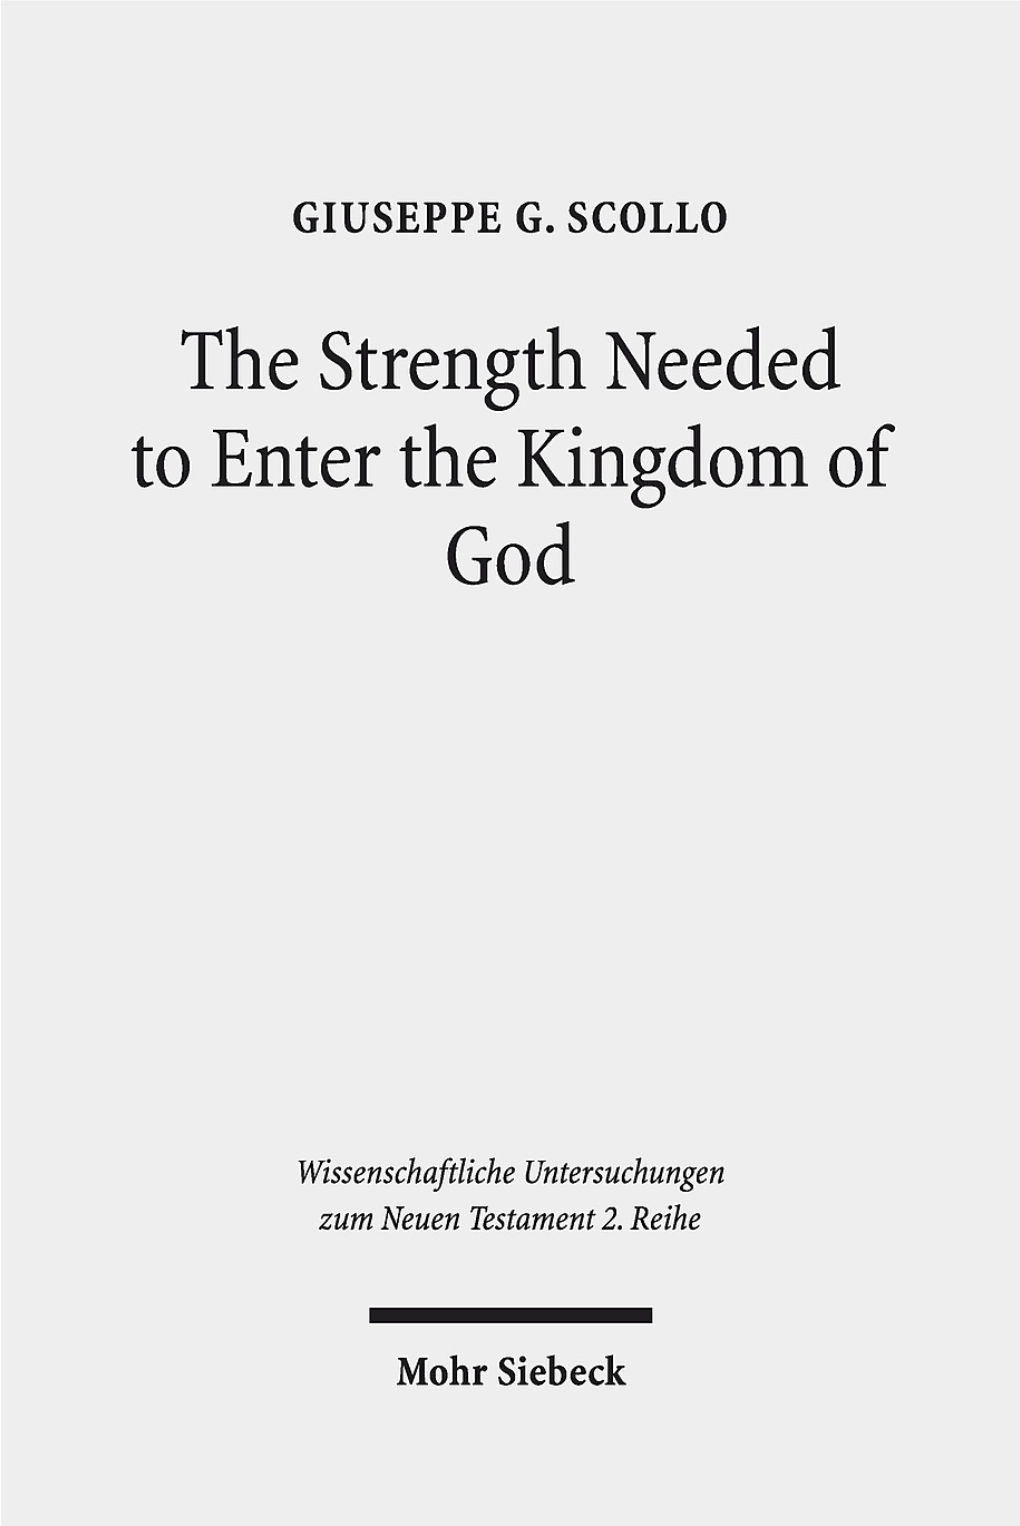 The Strength Needed to Enter the Kingdom of God